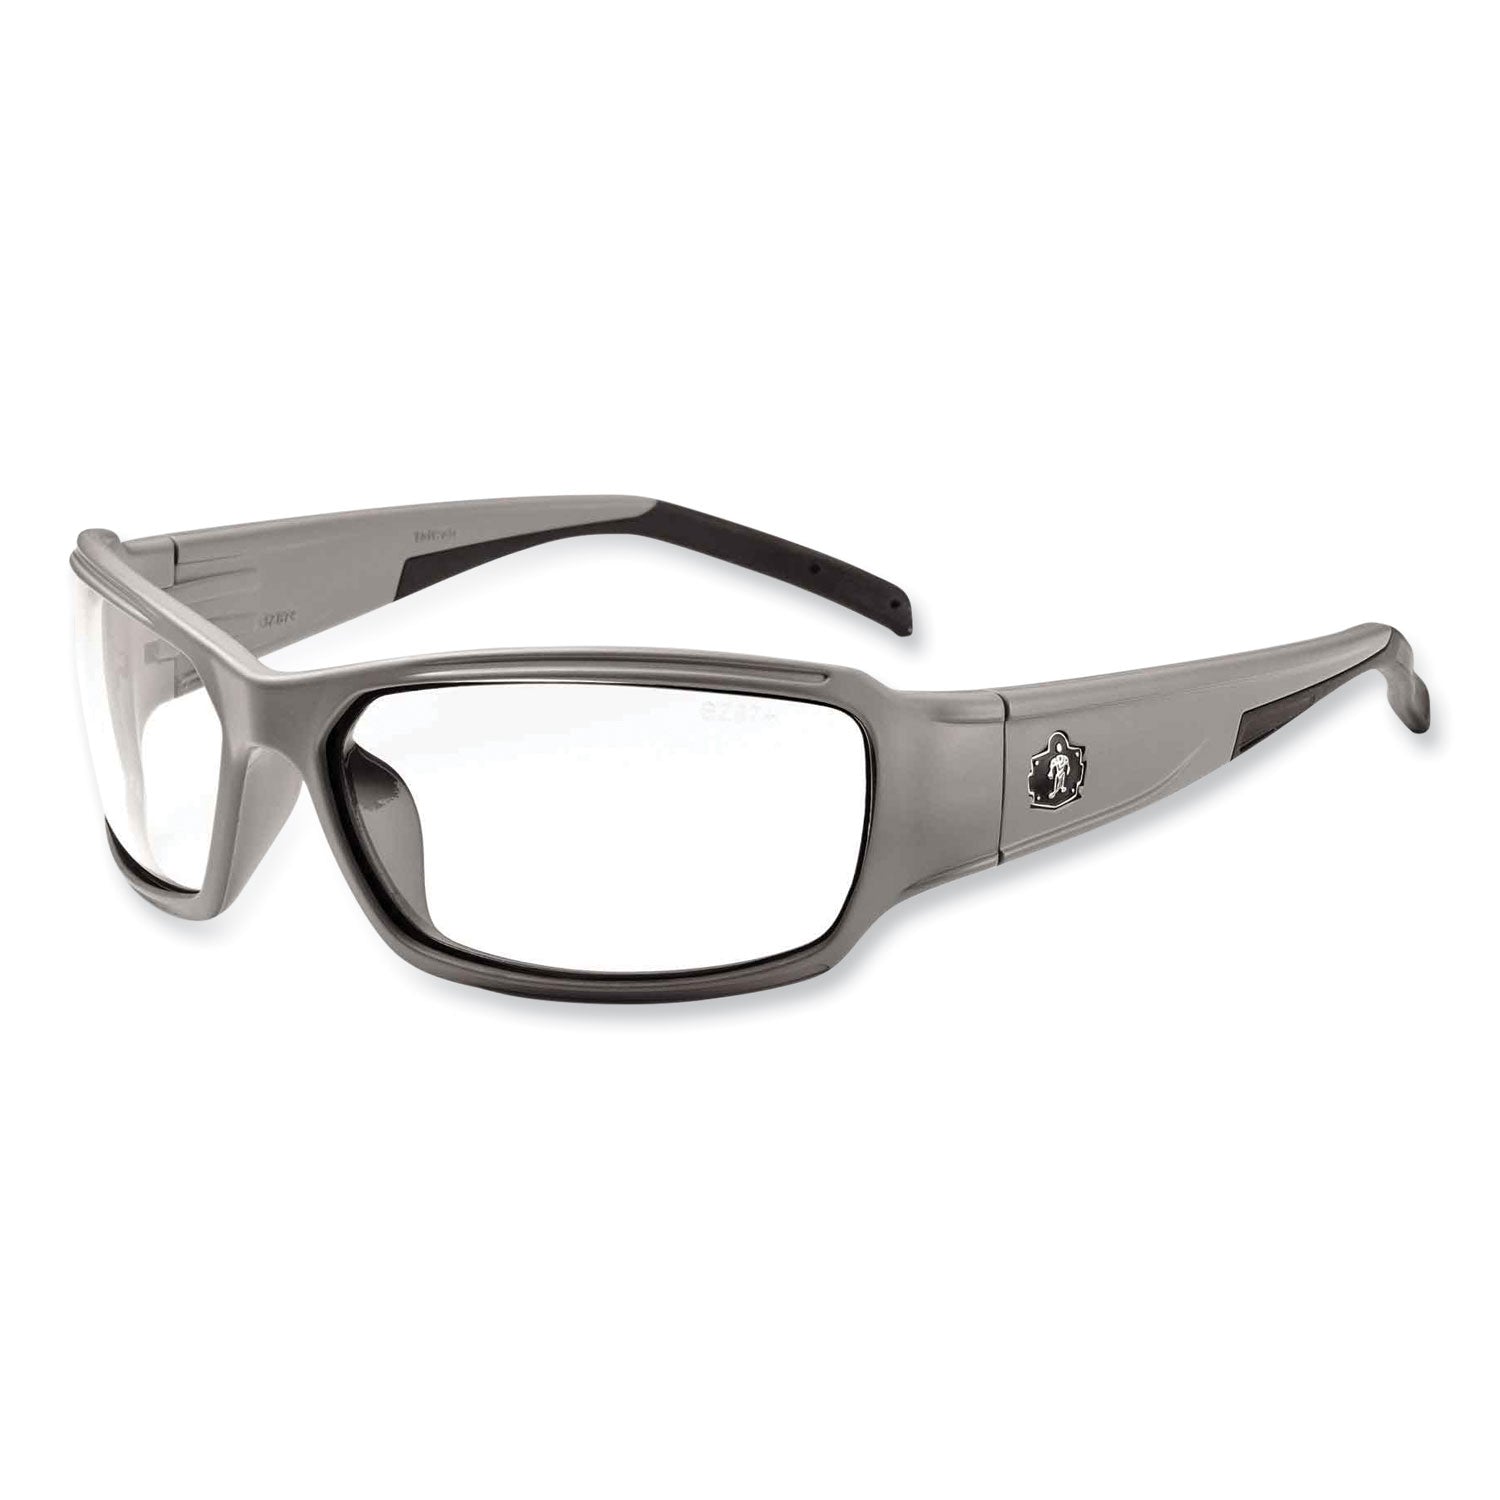 skullerz-thor-safety-glasses-matte-gray-nylon-impact-frame-clear-polycarbonate-lens-ships-in-1-3-business-days_ego51100 - 1